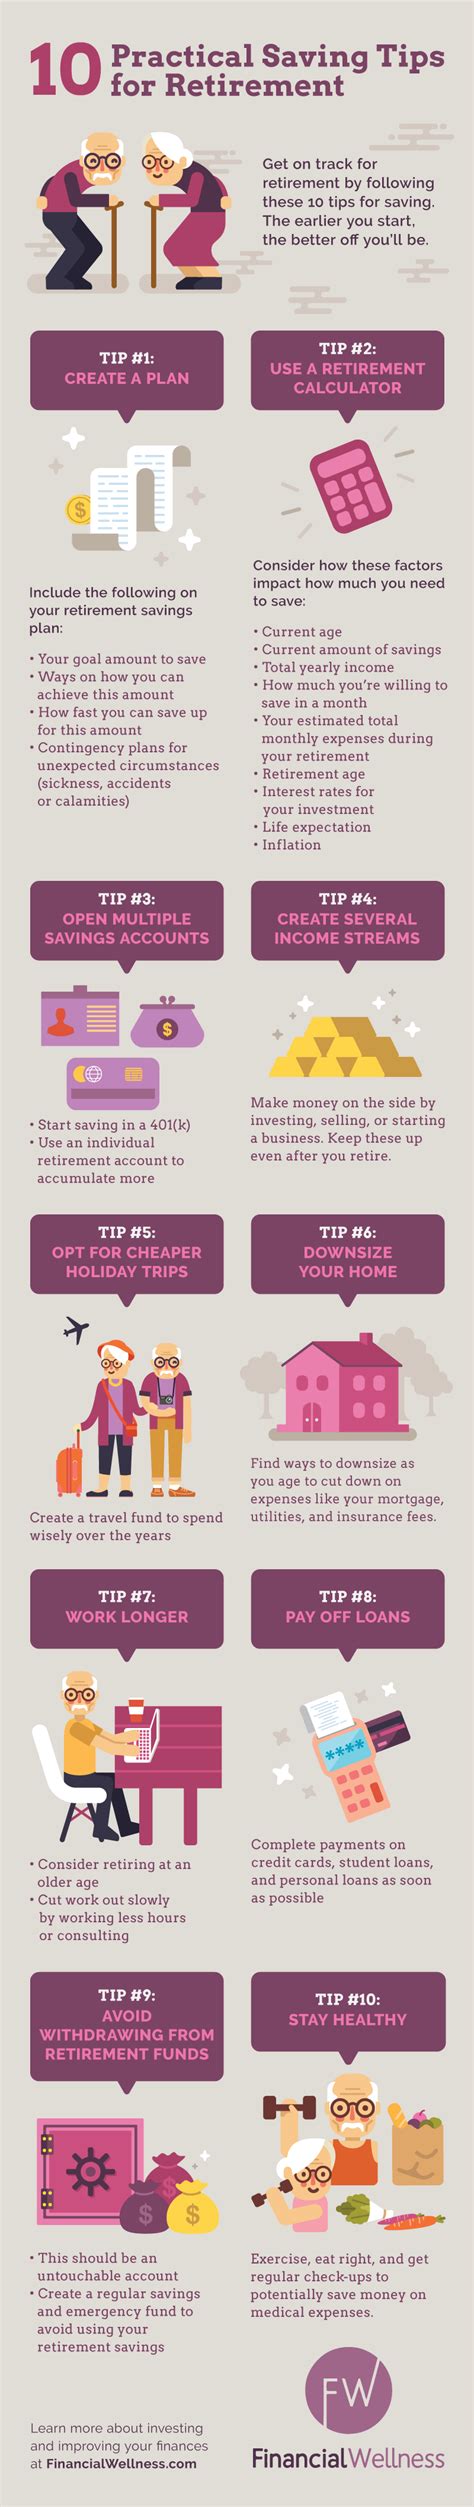 Saving For Retirement 21 Practical Tips You Can Start Today